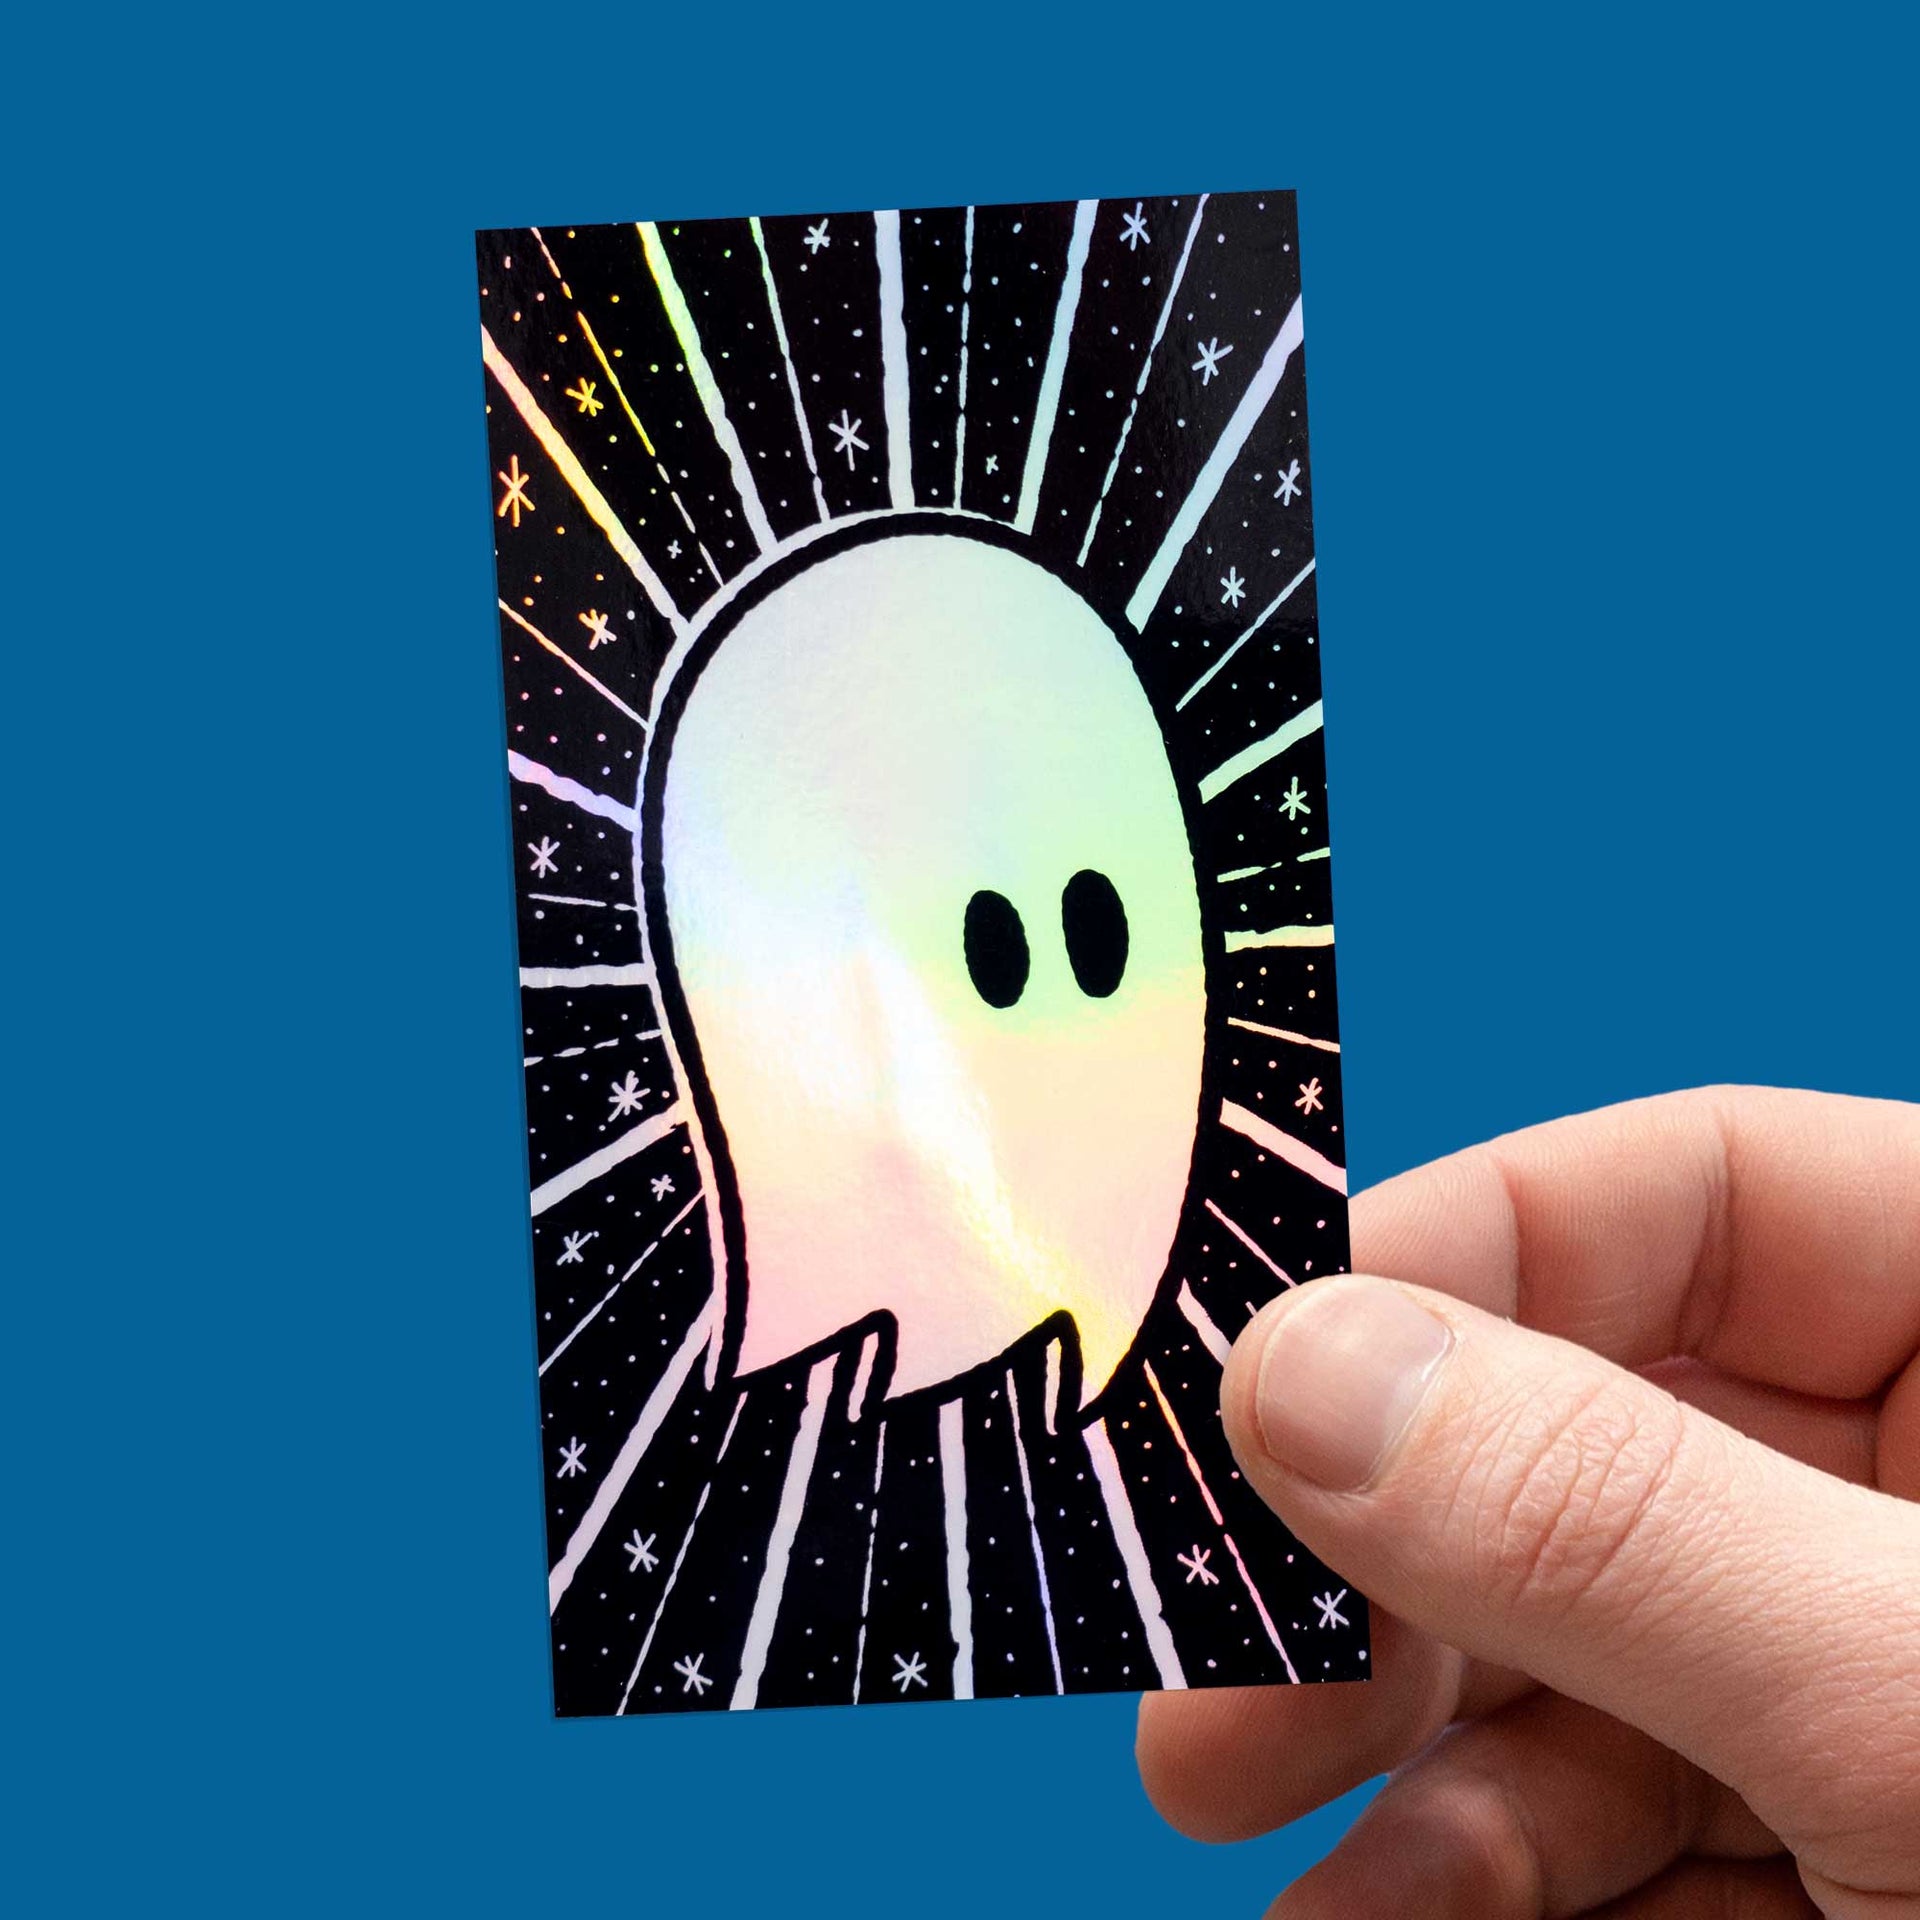 rectangular holographic ghost sticker in hand